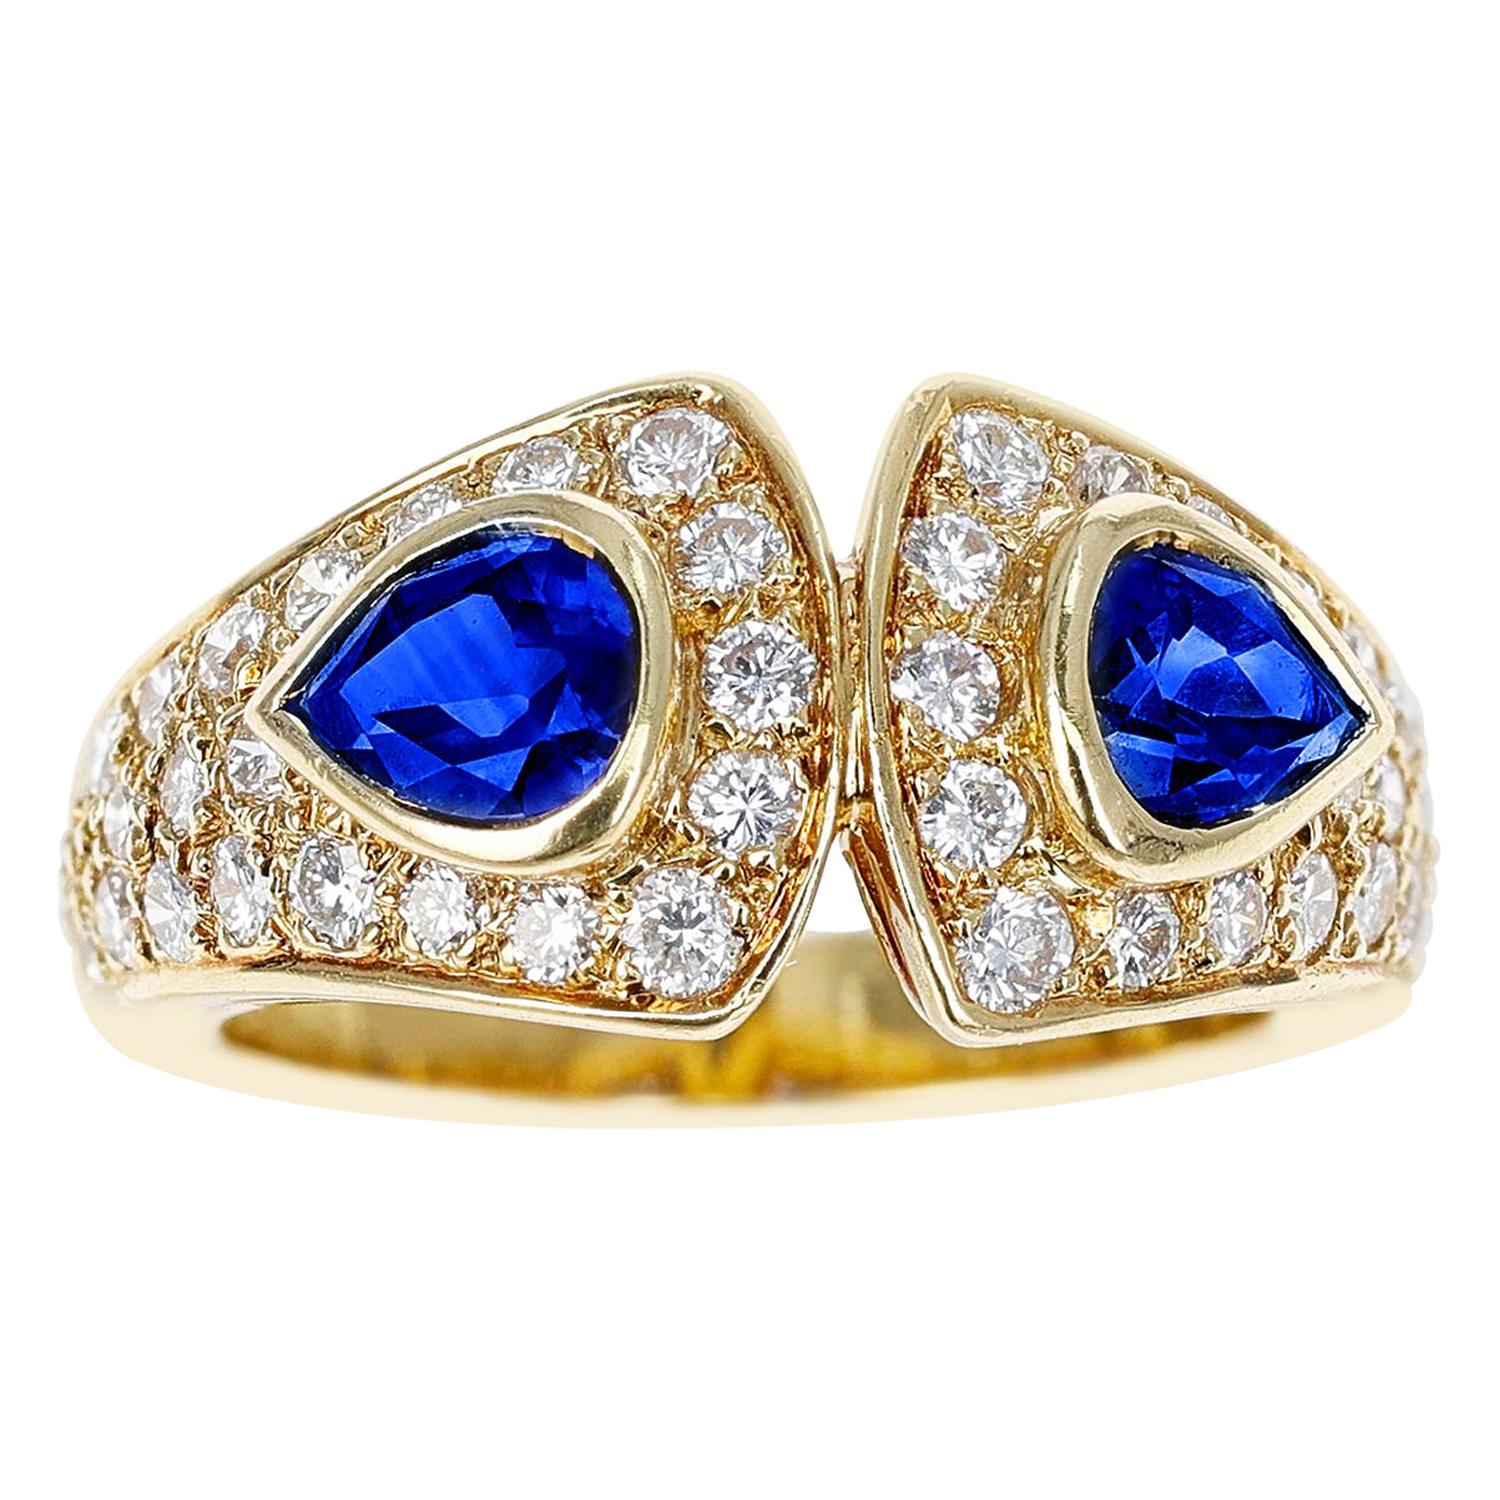 Van Cleef & Arpels Double Pear Shape Sapphire and Diamond Ring, 18K Yellow Gold For Sale